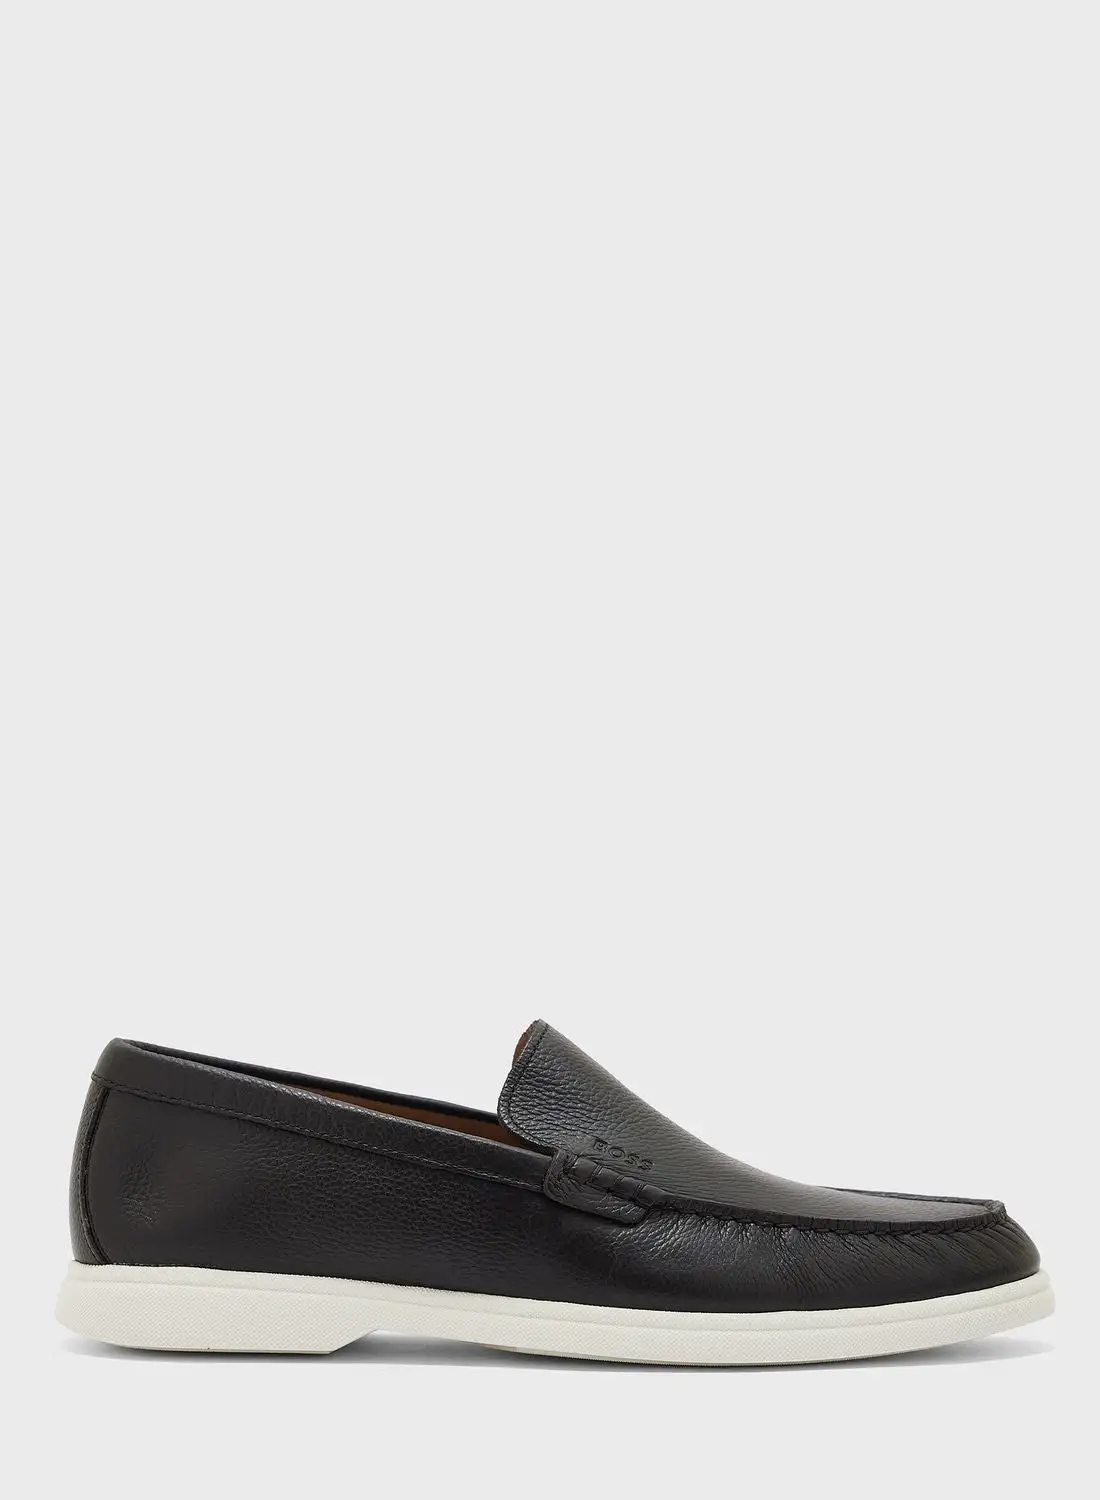 BOSS Casual Slip On Loafers